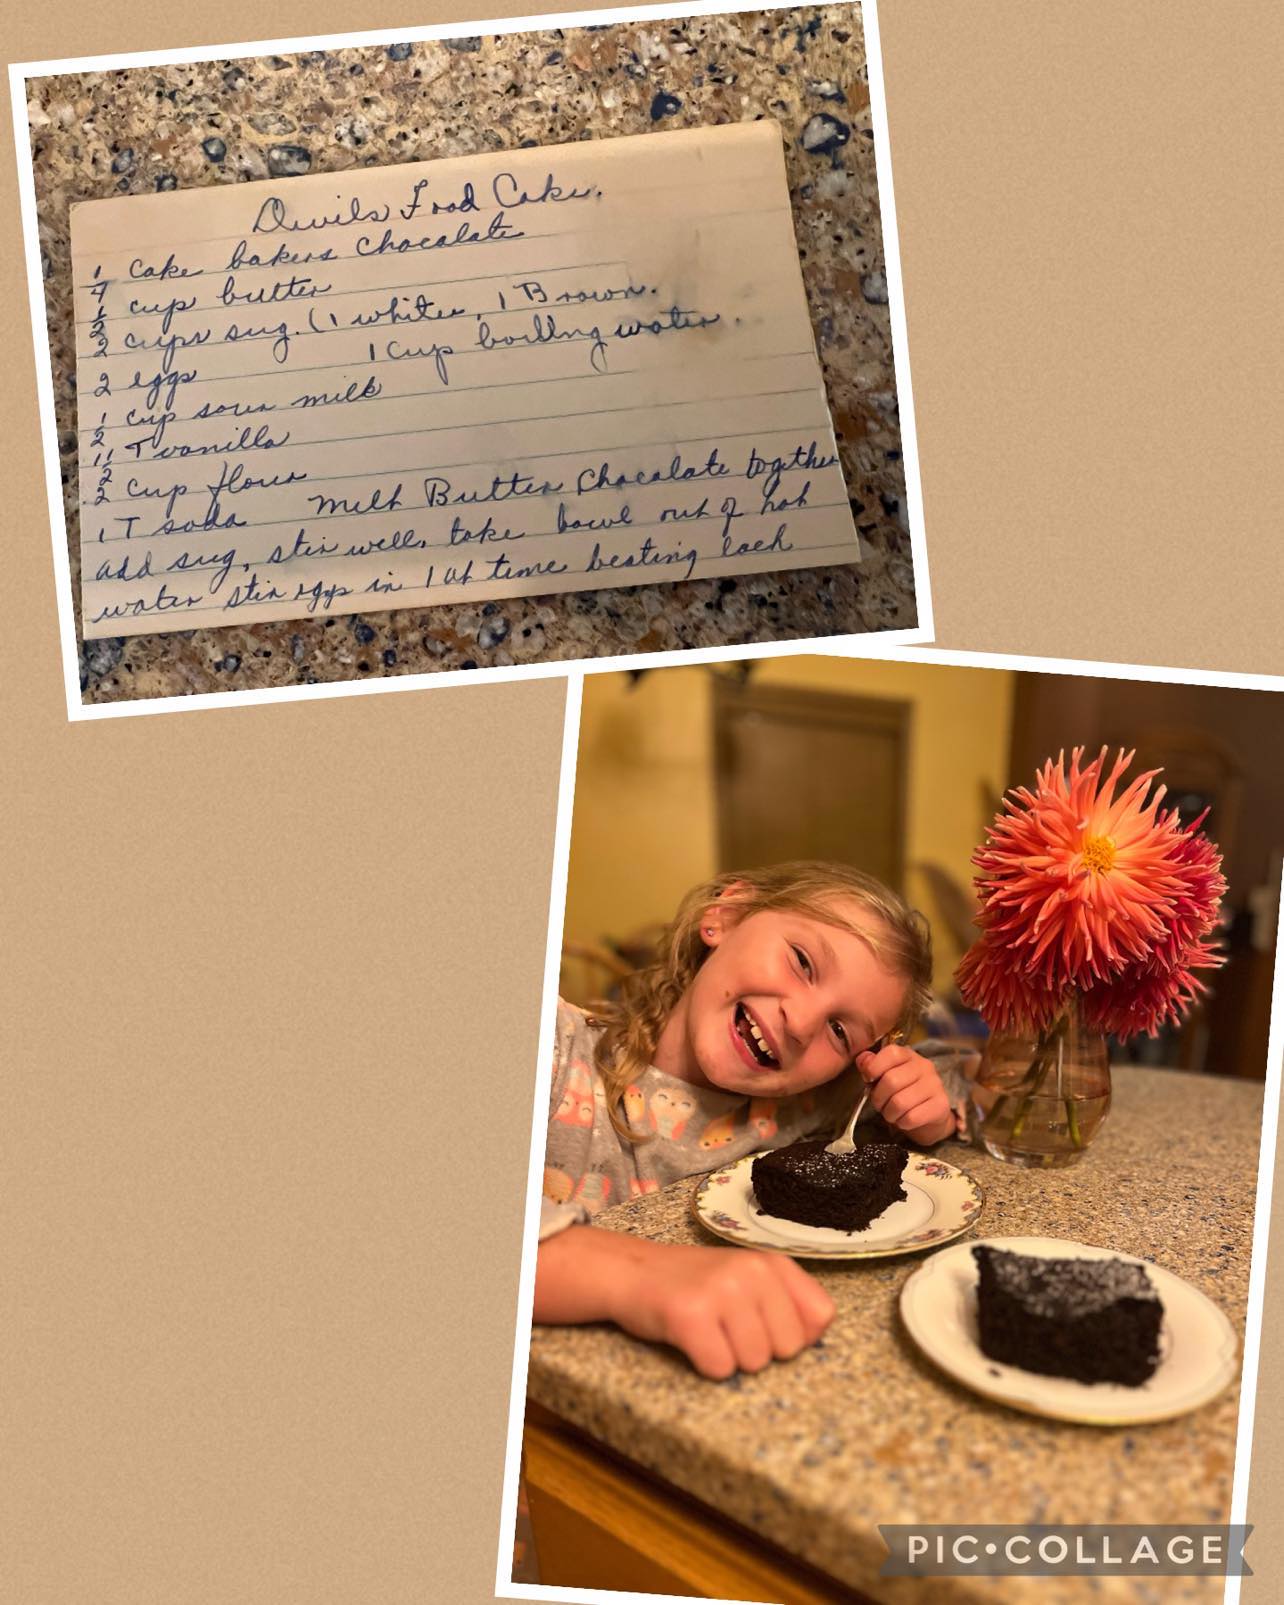 Cooking Through Vintage Recipes: Roxie’s Devil’s Food Cake